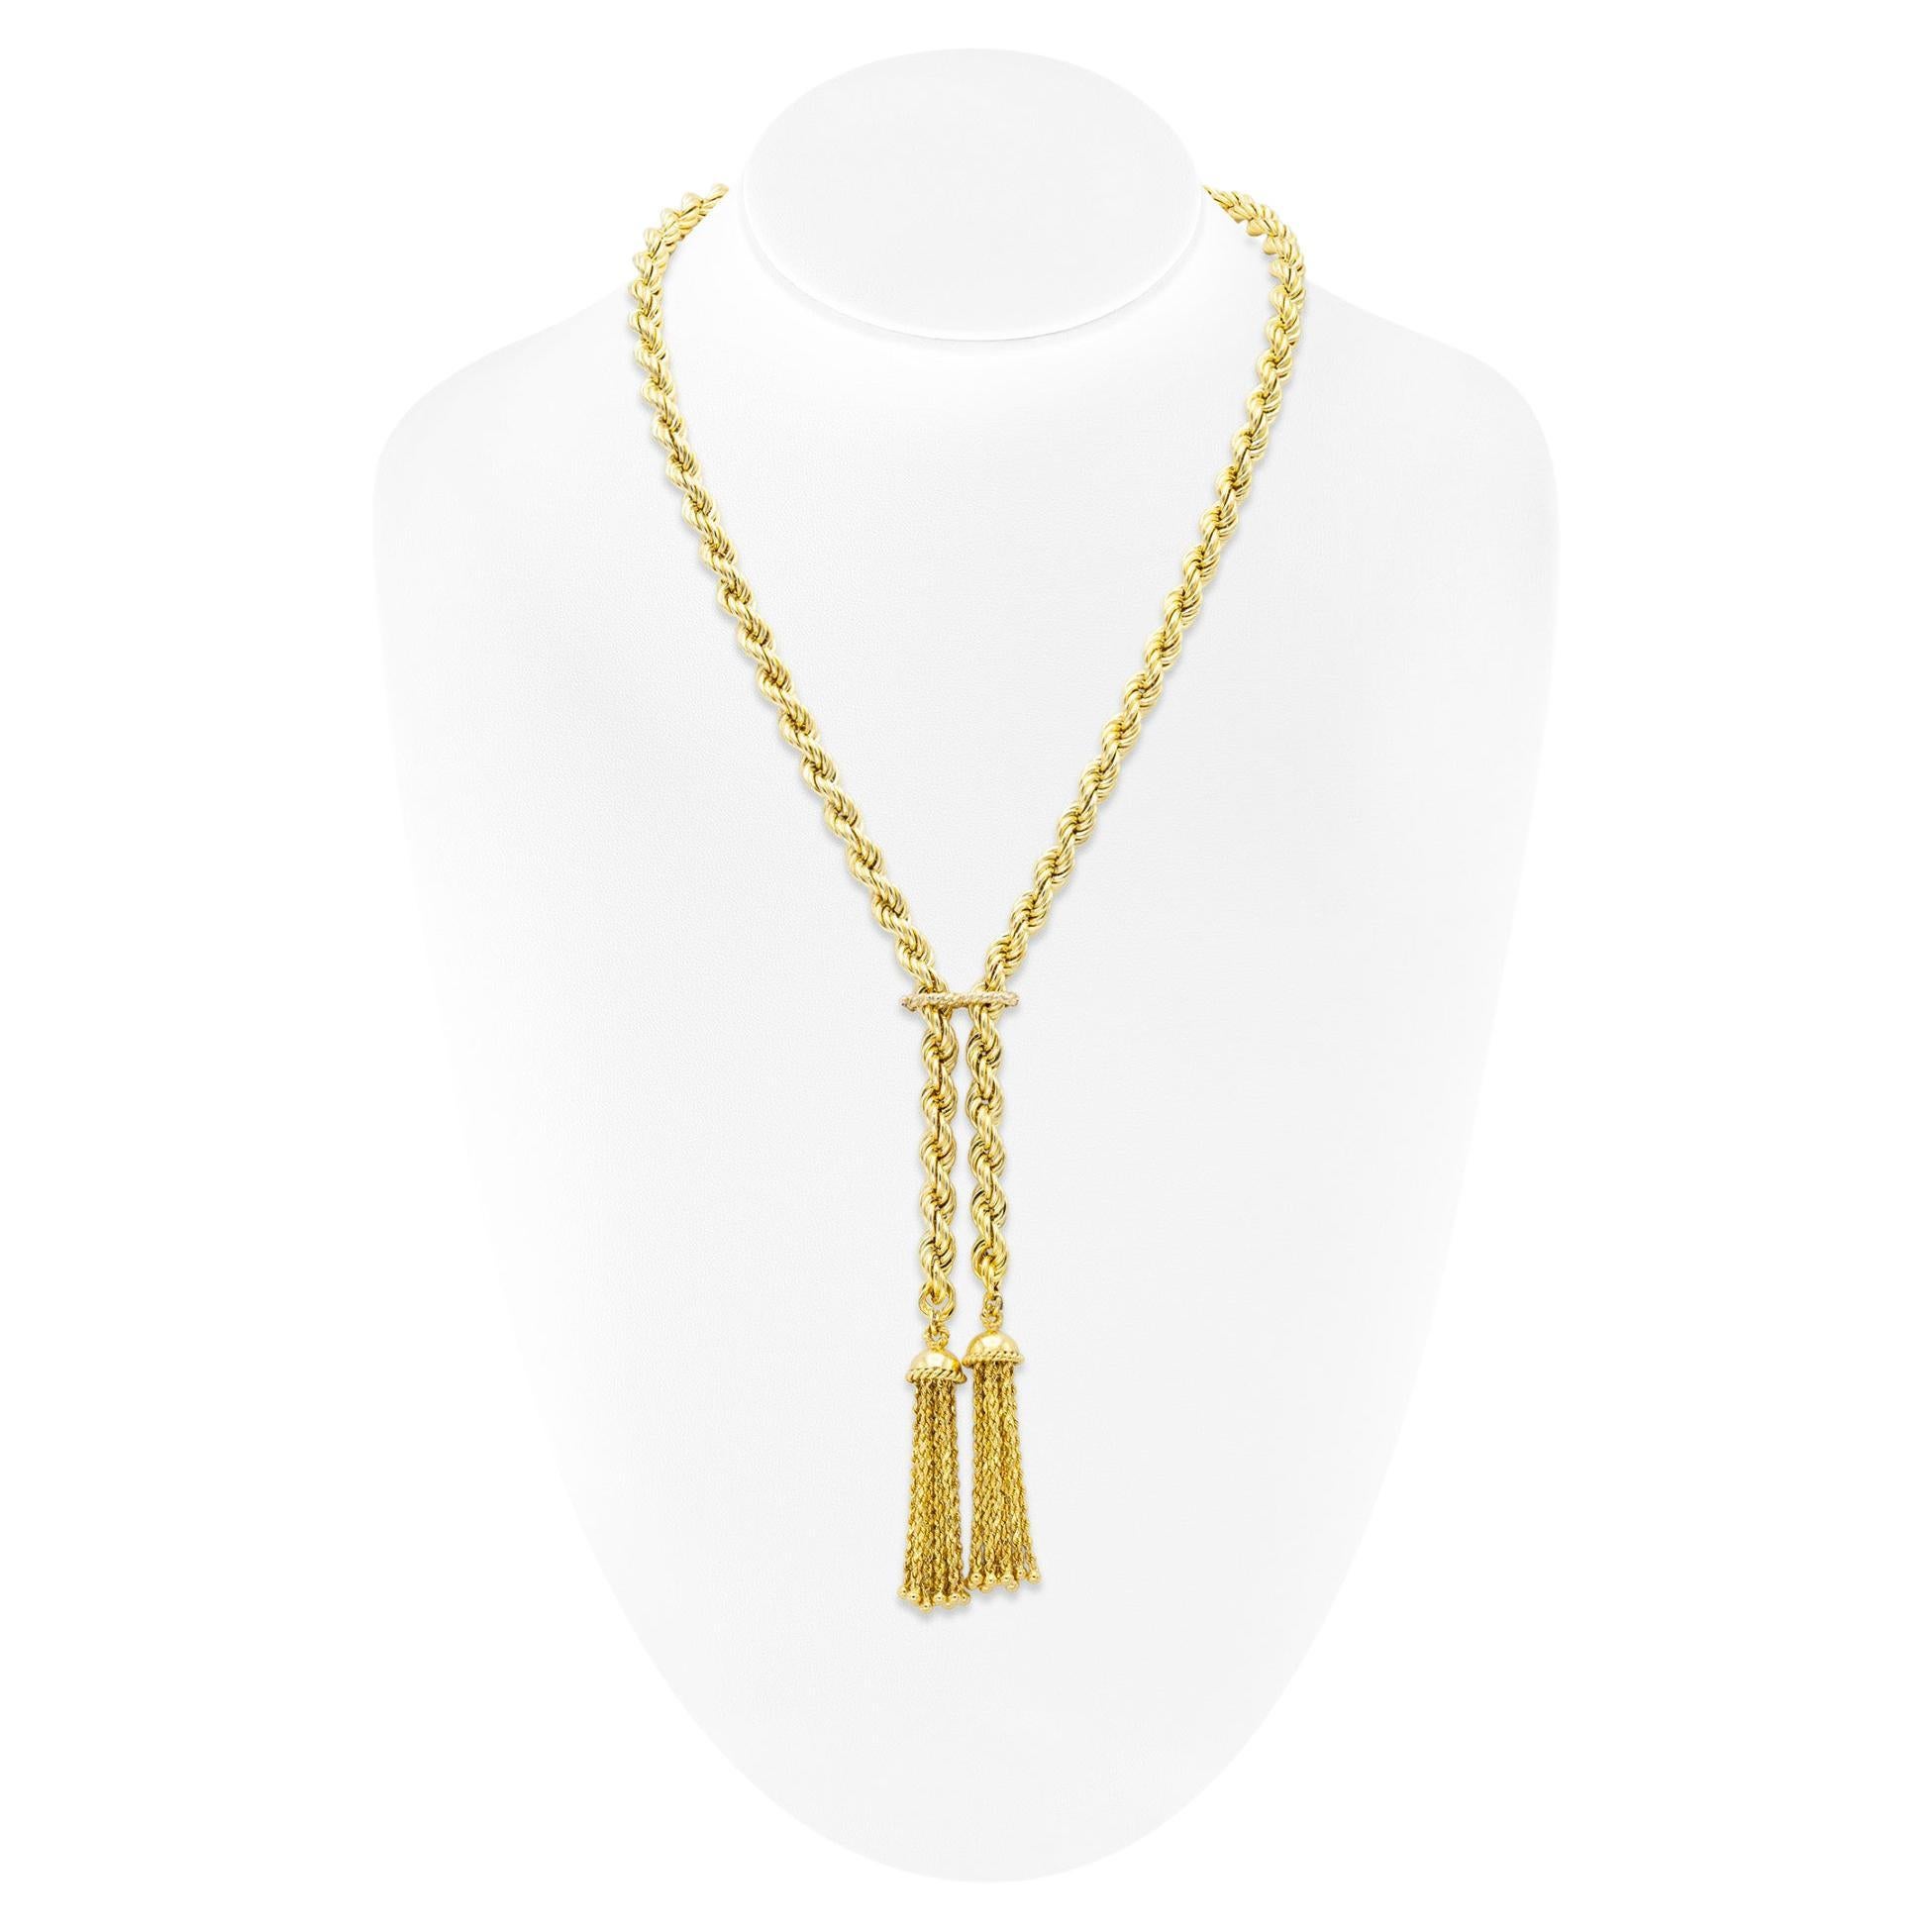 14K Gold Rope Chain Necklace with Tassels For Sale